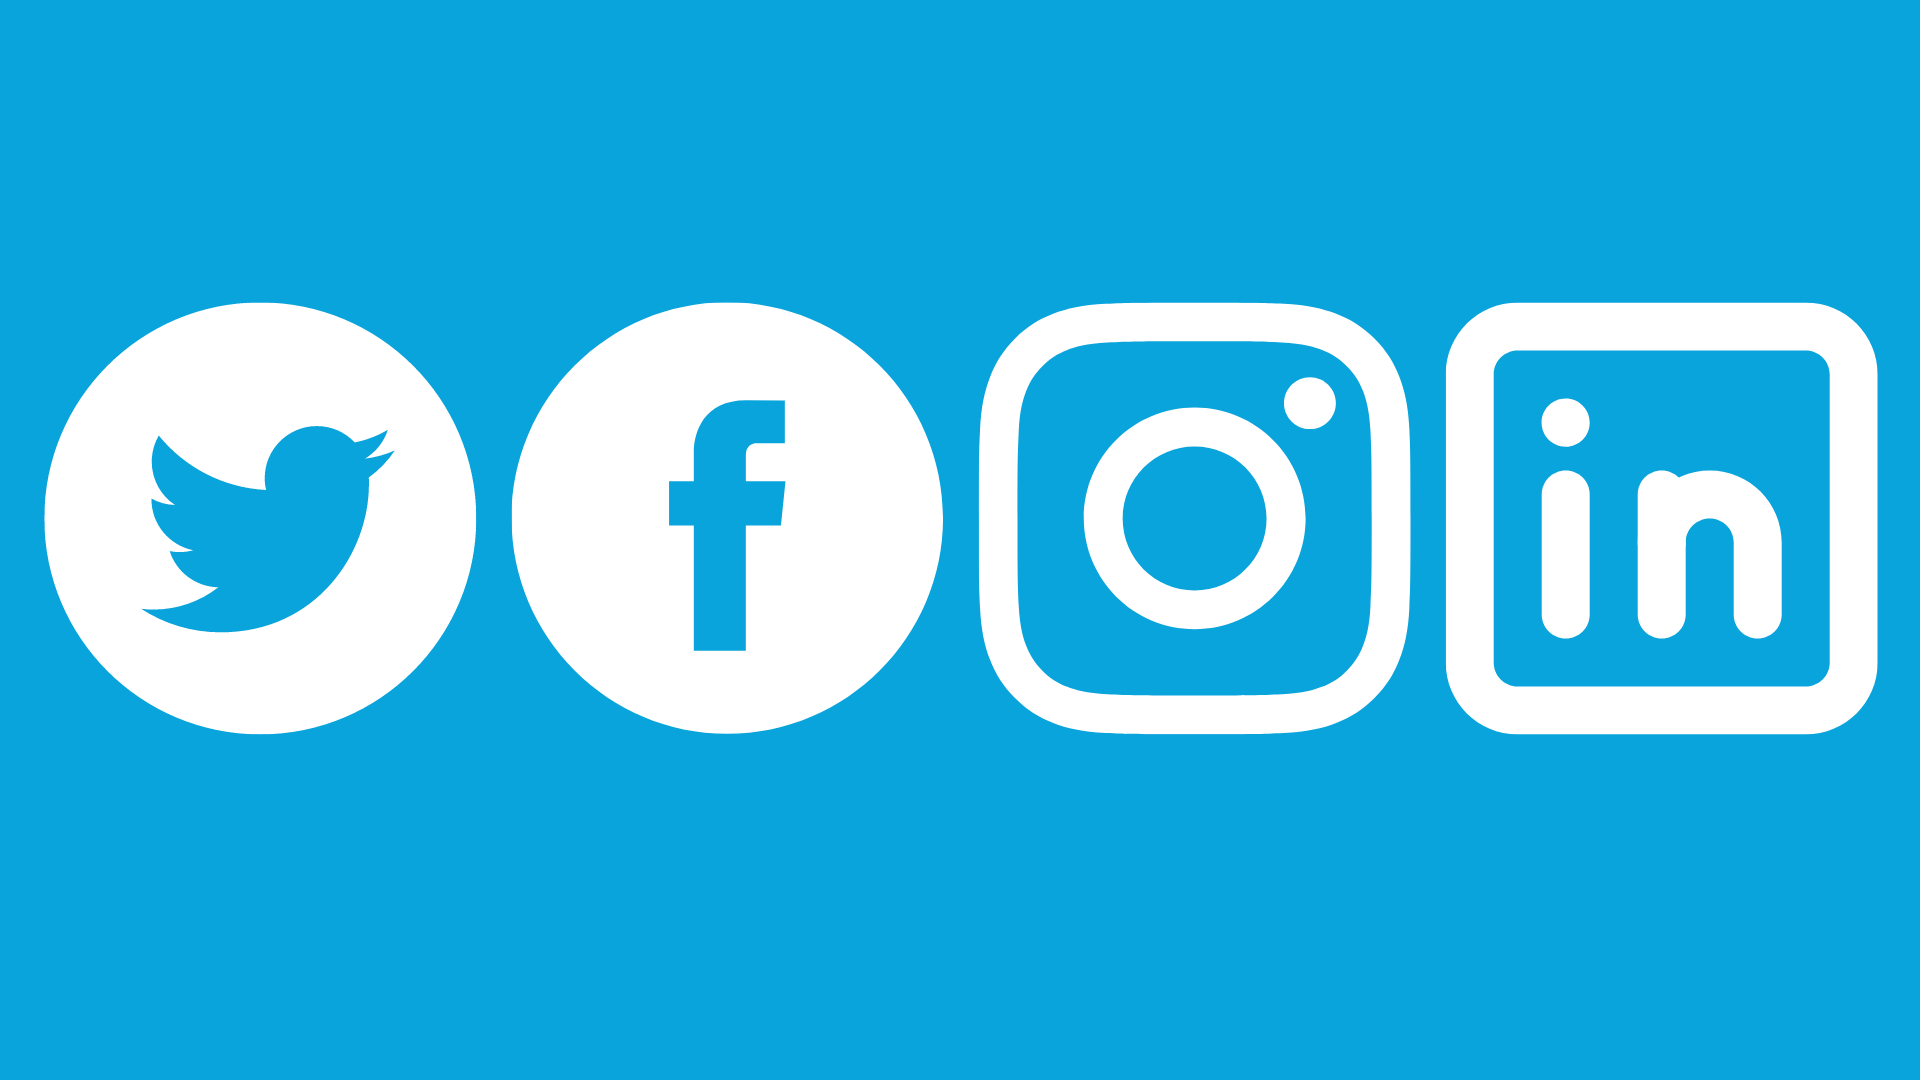 Social media icons in a row on a blue background